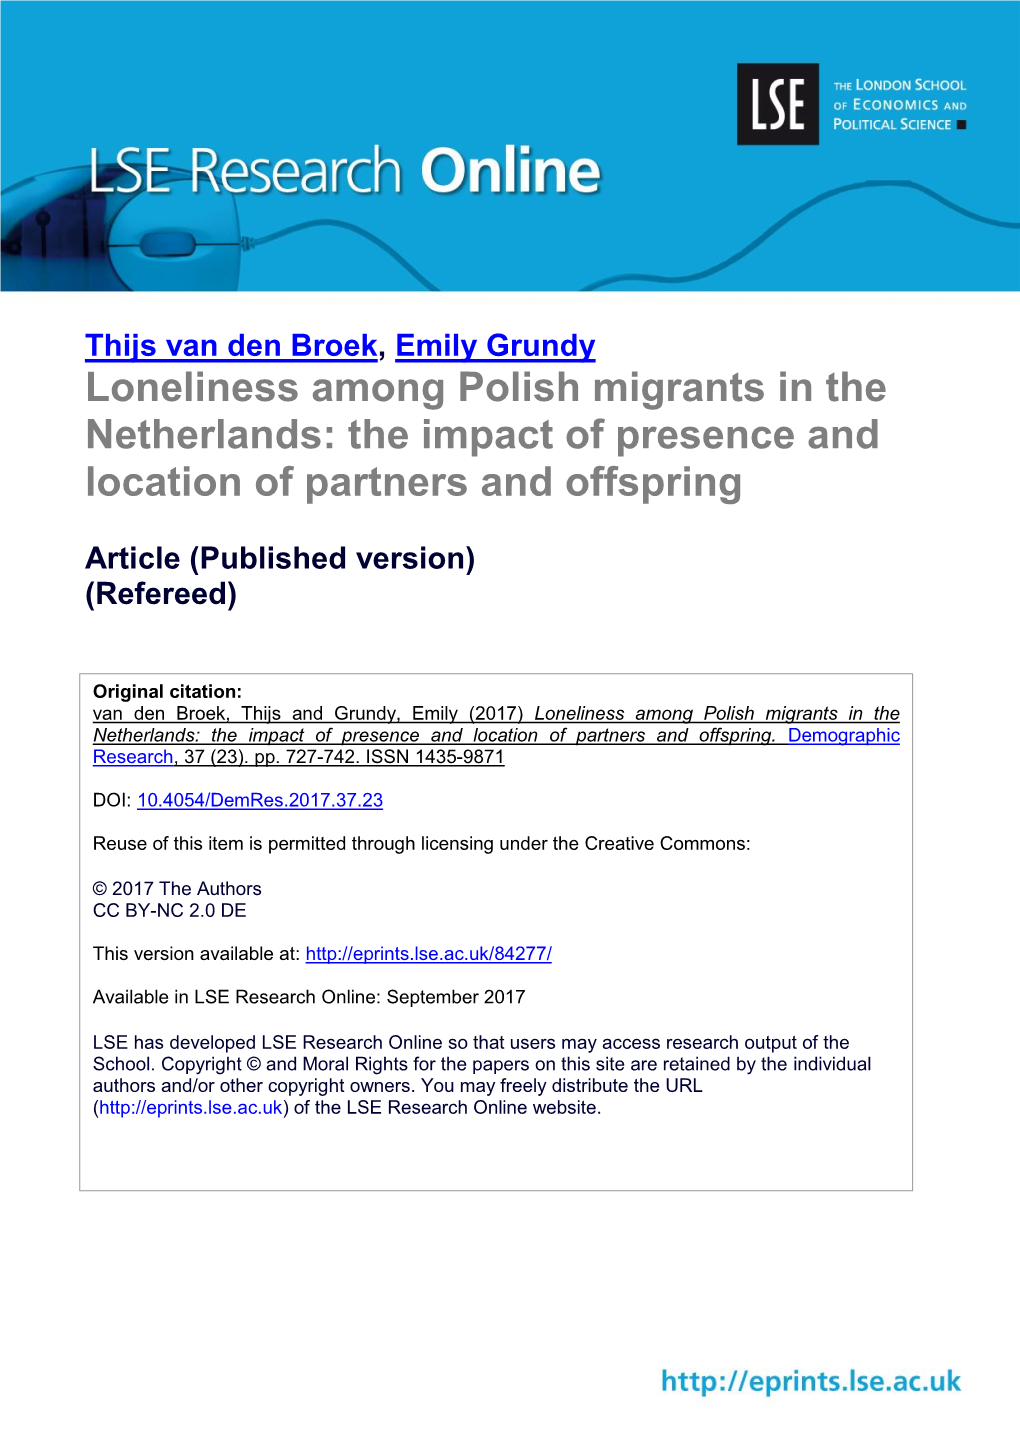 Loneliness Among Polish Migrants in the Netherlands: the Impact of Presence and Location of Partners and Offspring